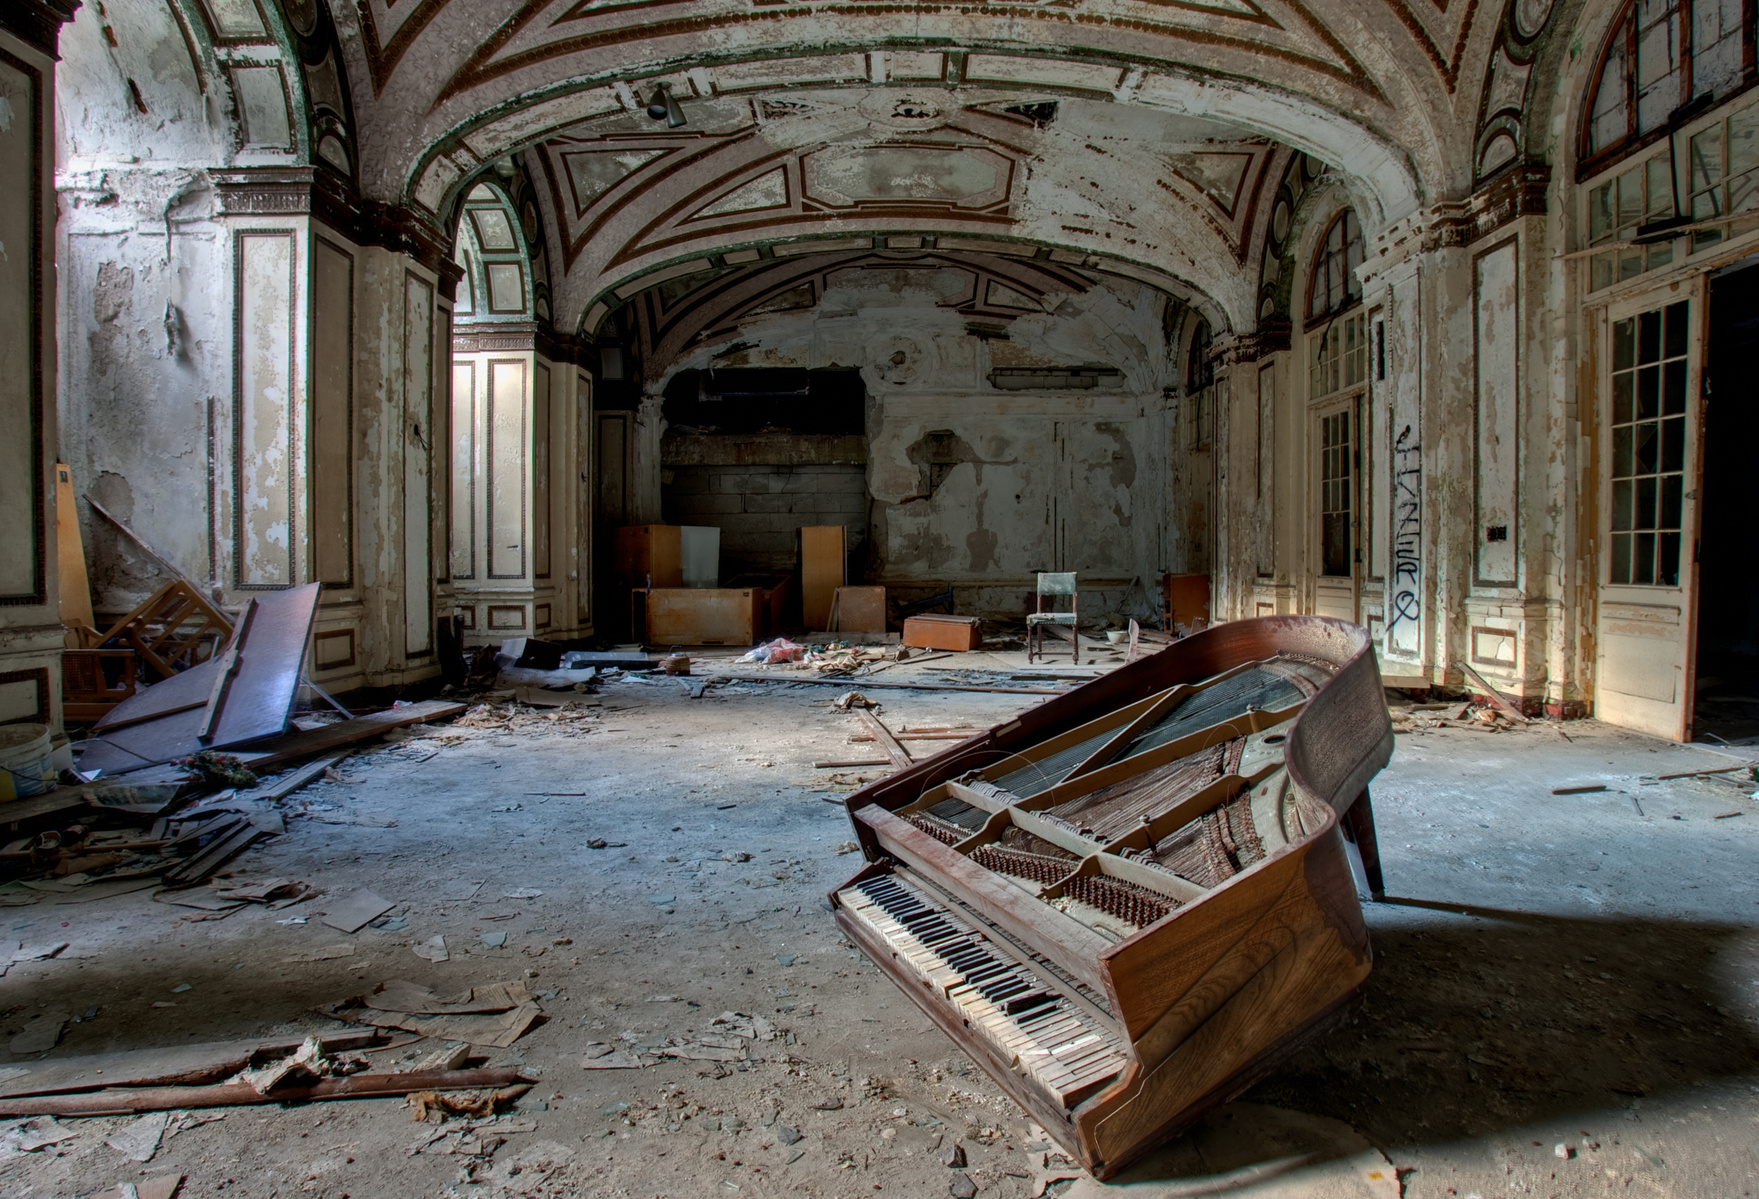 Step into the haunting beauty of Lee Plaza, an abandoned building in Detroit, MI. Witness a baby grand piano, leaning on its last leg, as streaks of light create an ethereal atmosphere from left to right. Explore the forgotten allure of decay in Lee Plaza